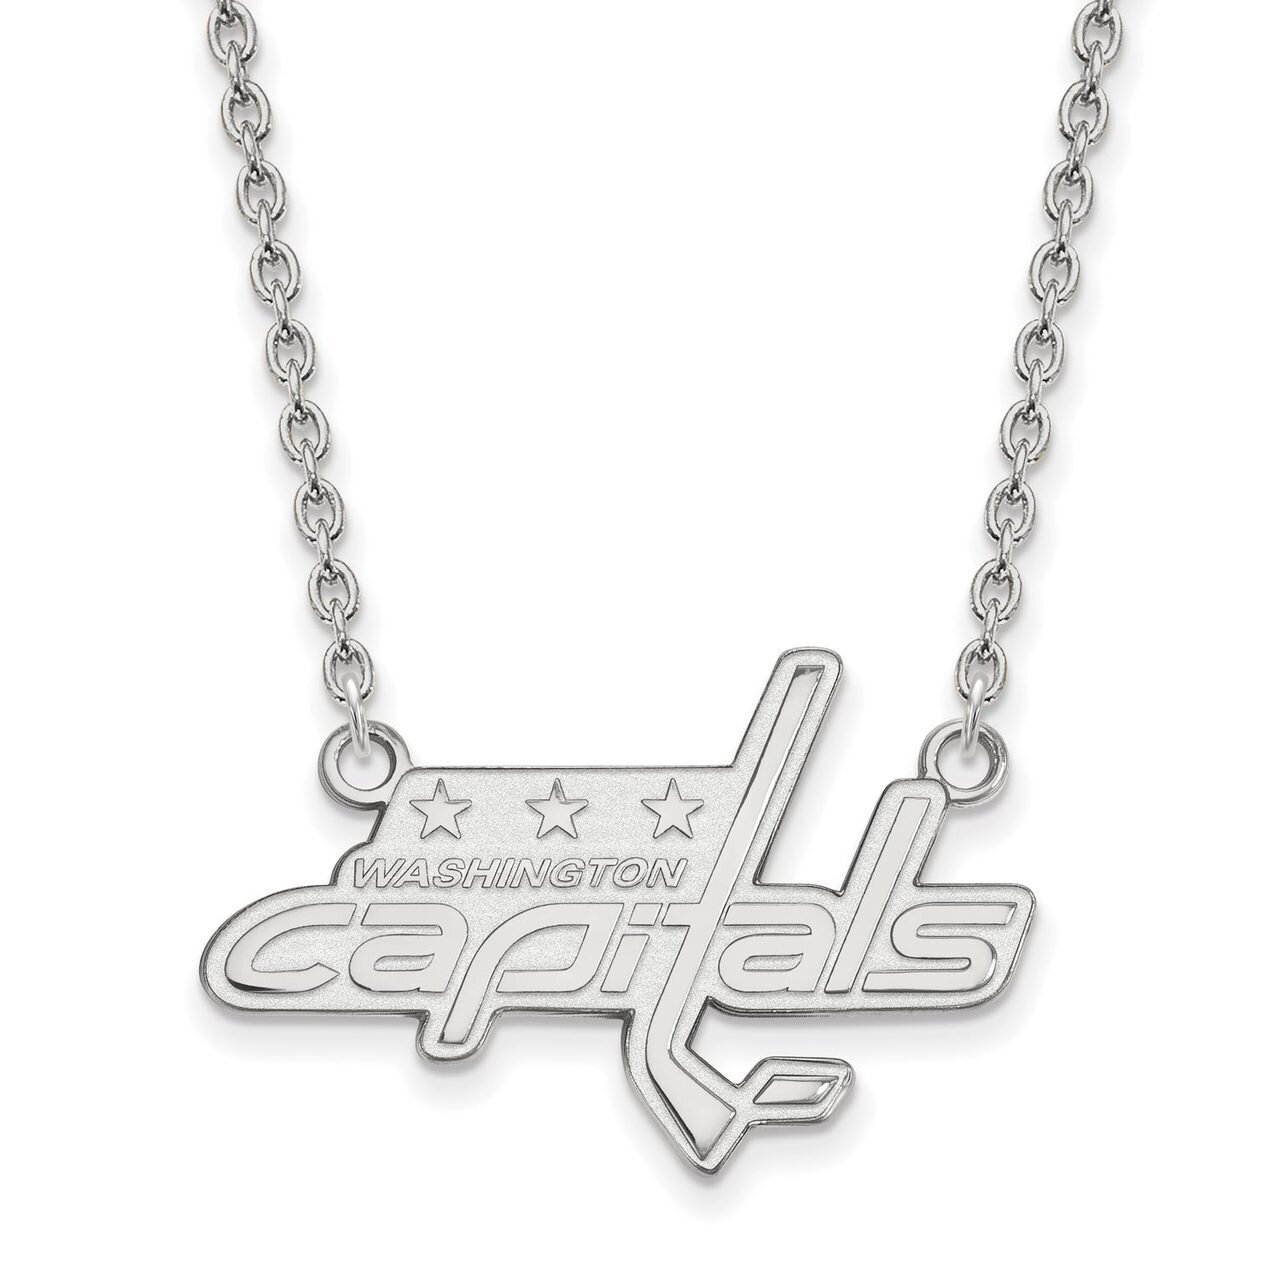 Washington Capitals Large Pendant with Chain Necklace Sterling Silver SS013CAP-18